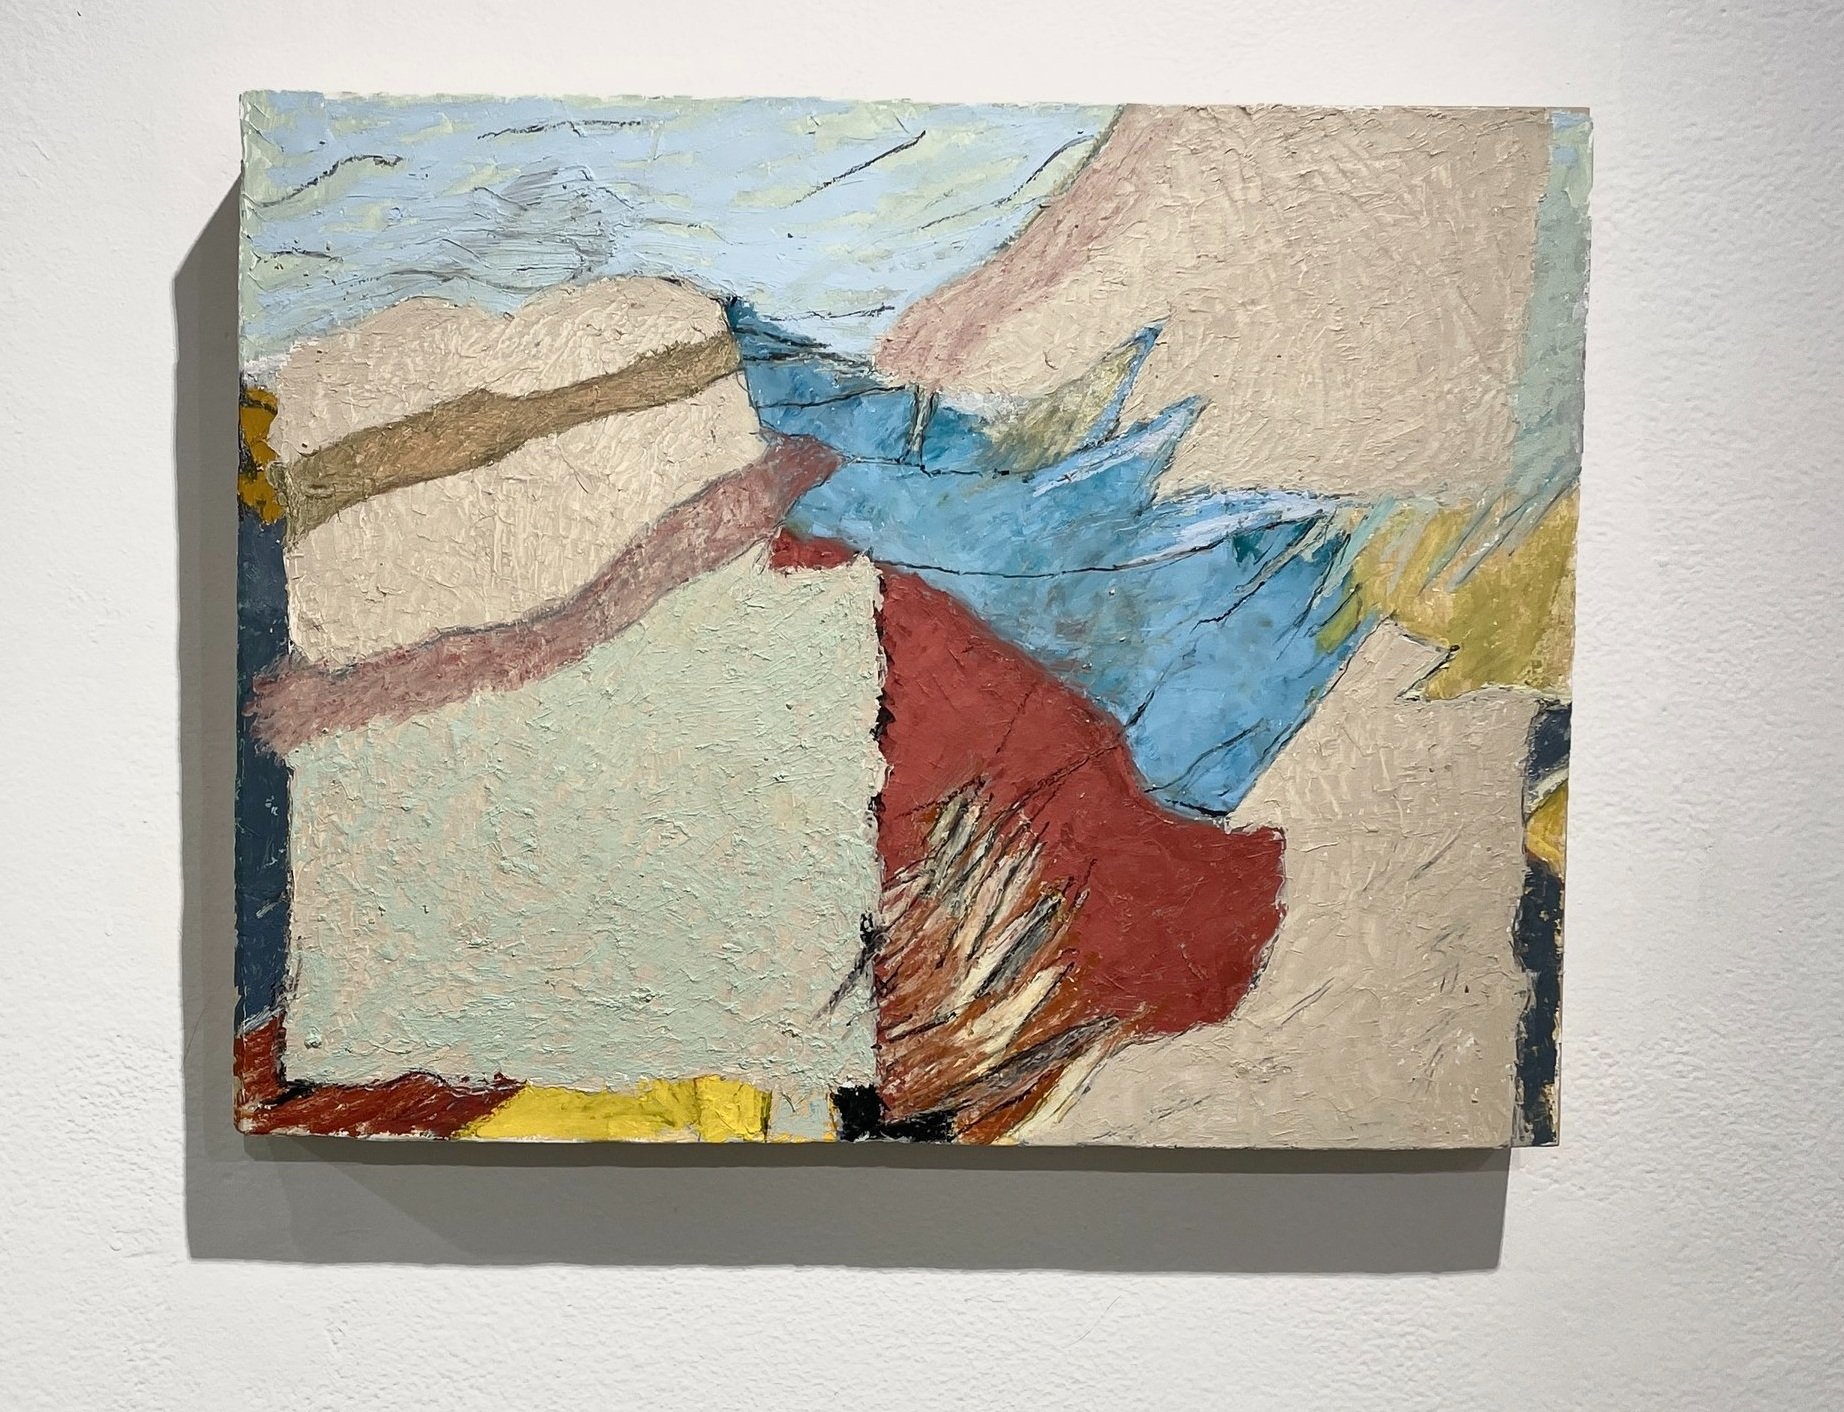  Untitled  Roberta Richman  Oil stick on paper mounted on board $250     Landscape inspires my work. Looking at horizons, fields, marshland, dunes and beginning new work with a particular place in mind is how I move from a white sheet of paper to the